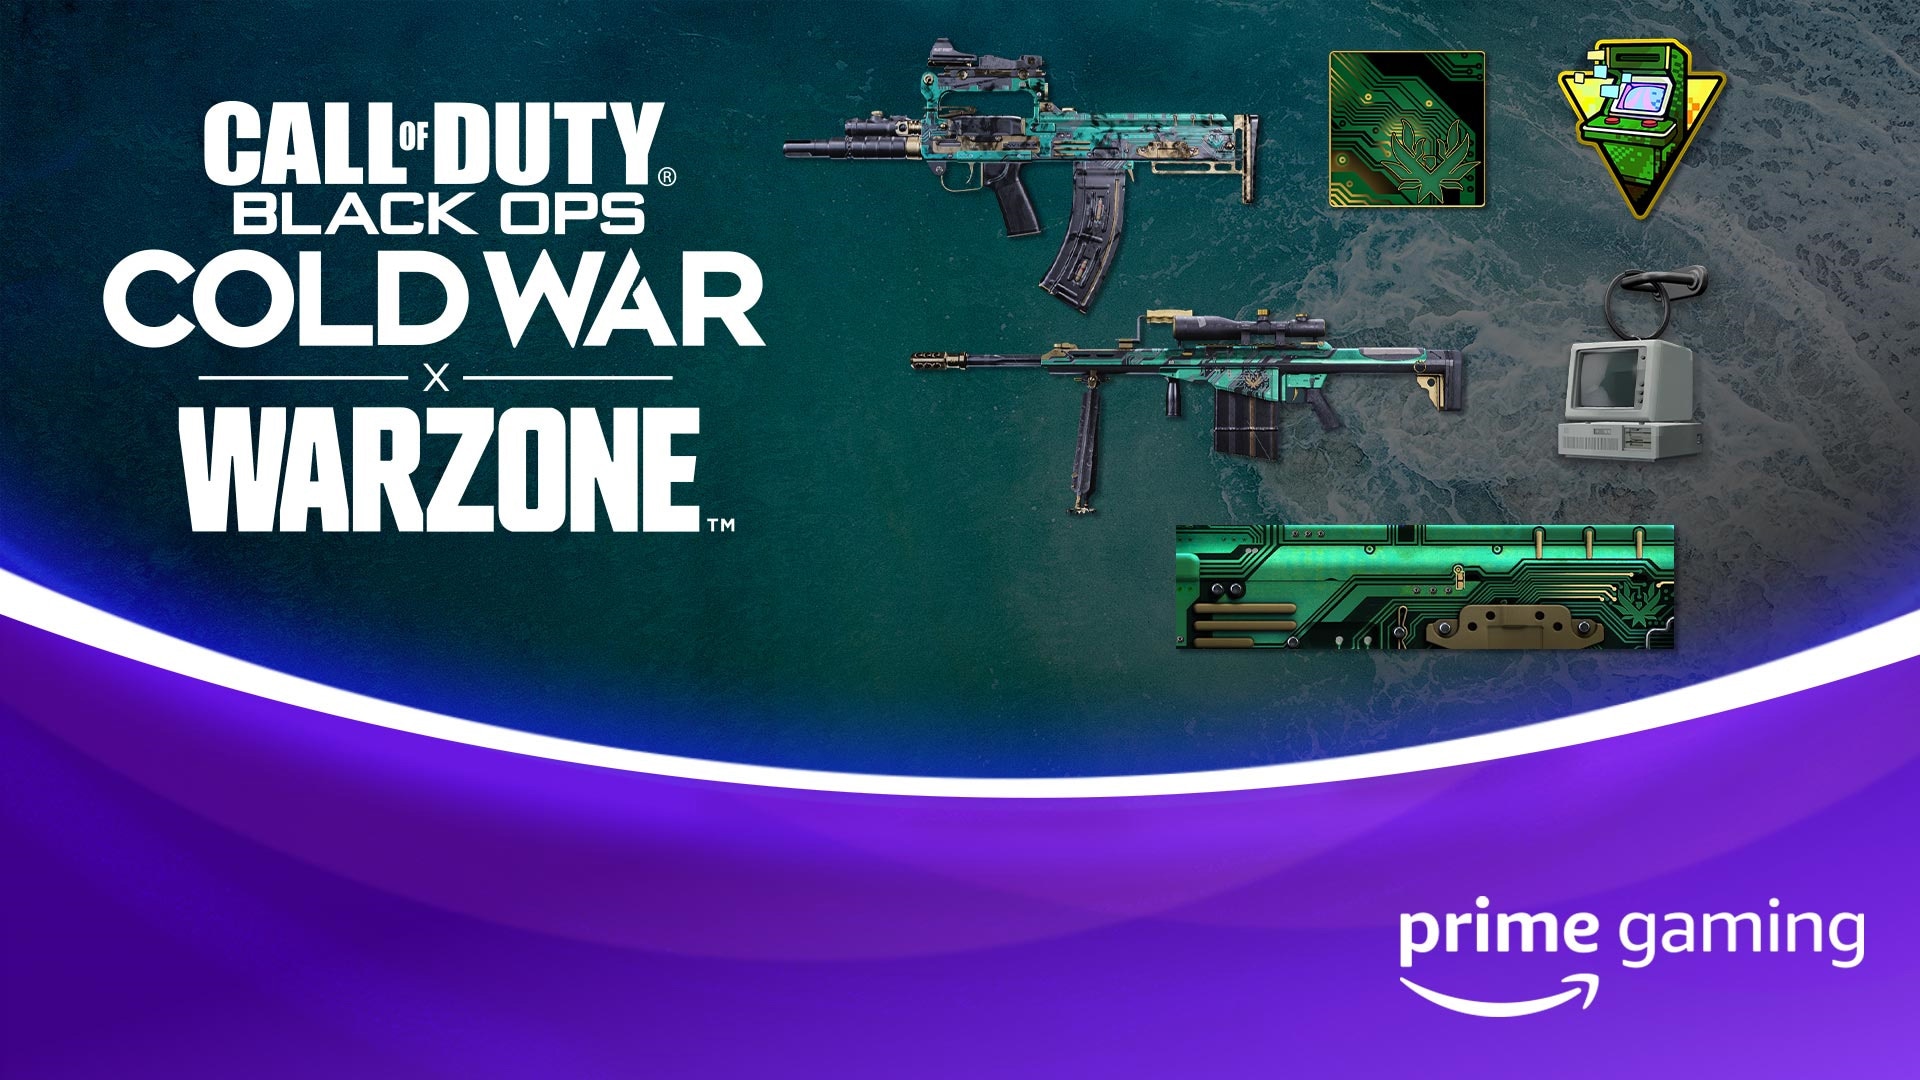 Warzone Prime Gaming - how to claim rewards